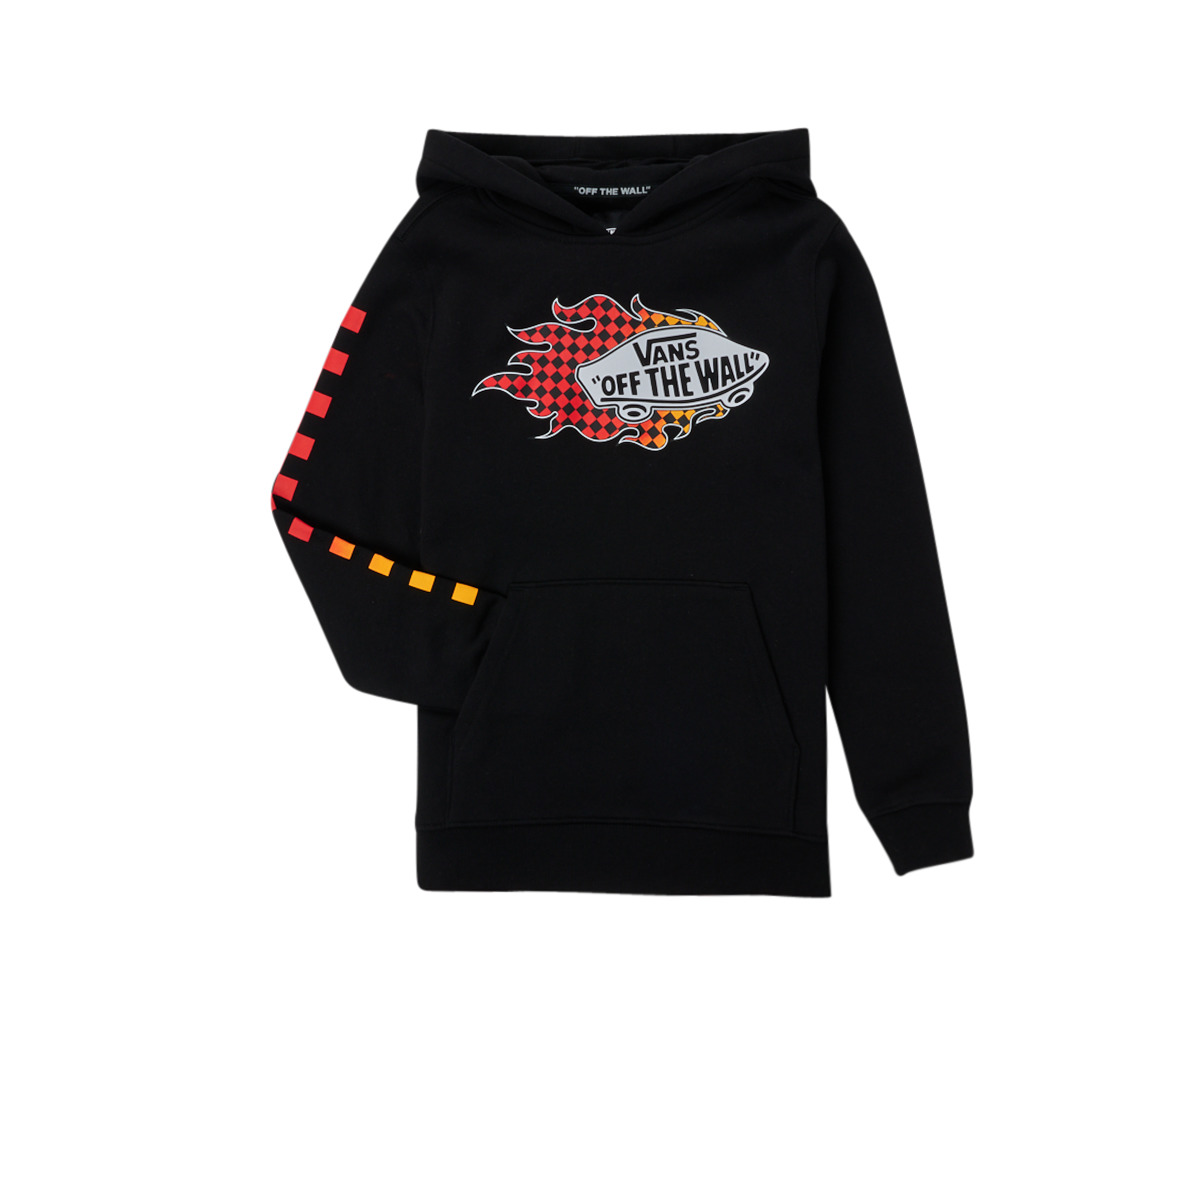 Vans NET Free - | Clothing ! - LOGO sweaters Black PO Spartoo Child delivery